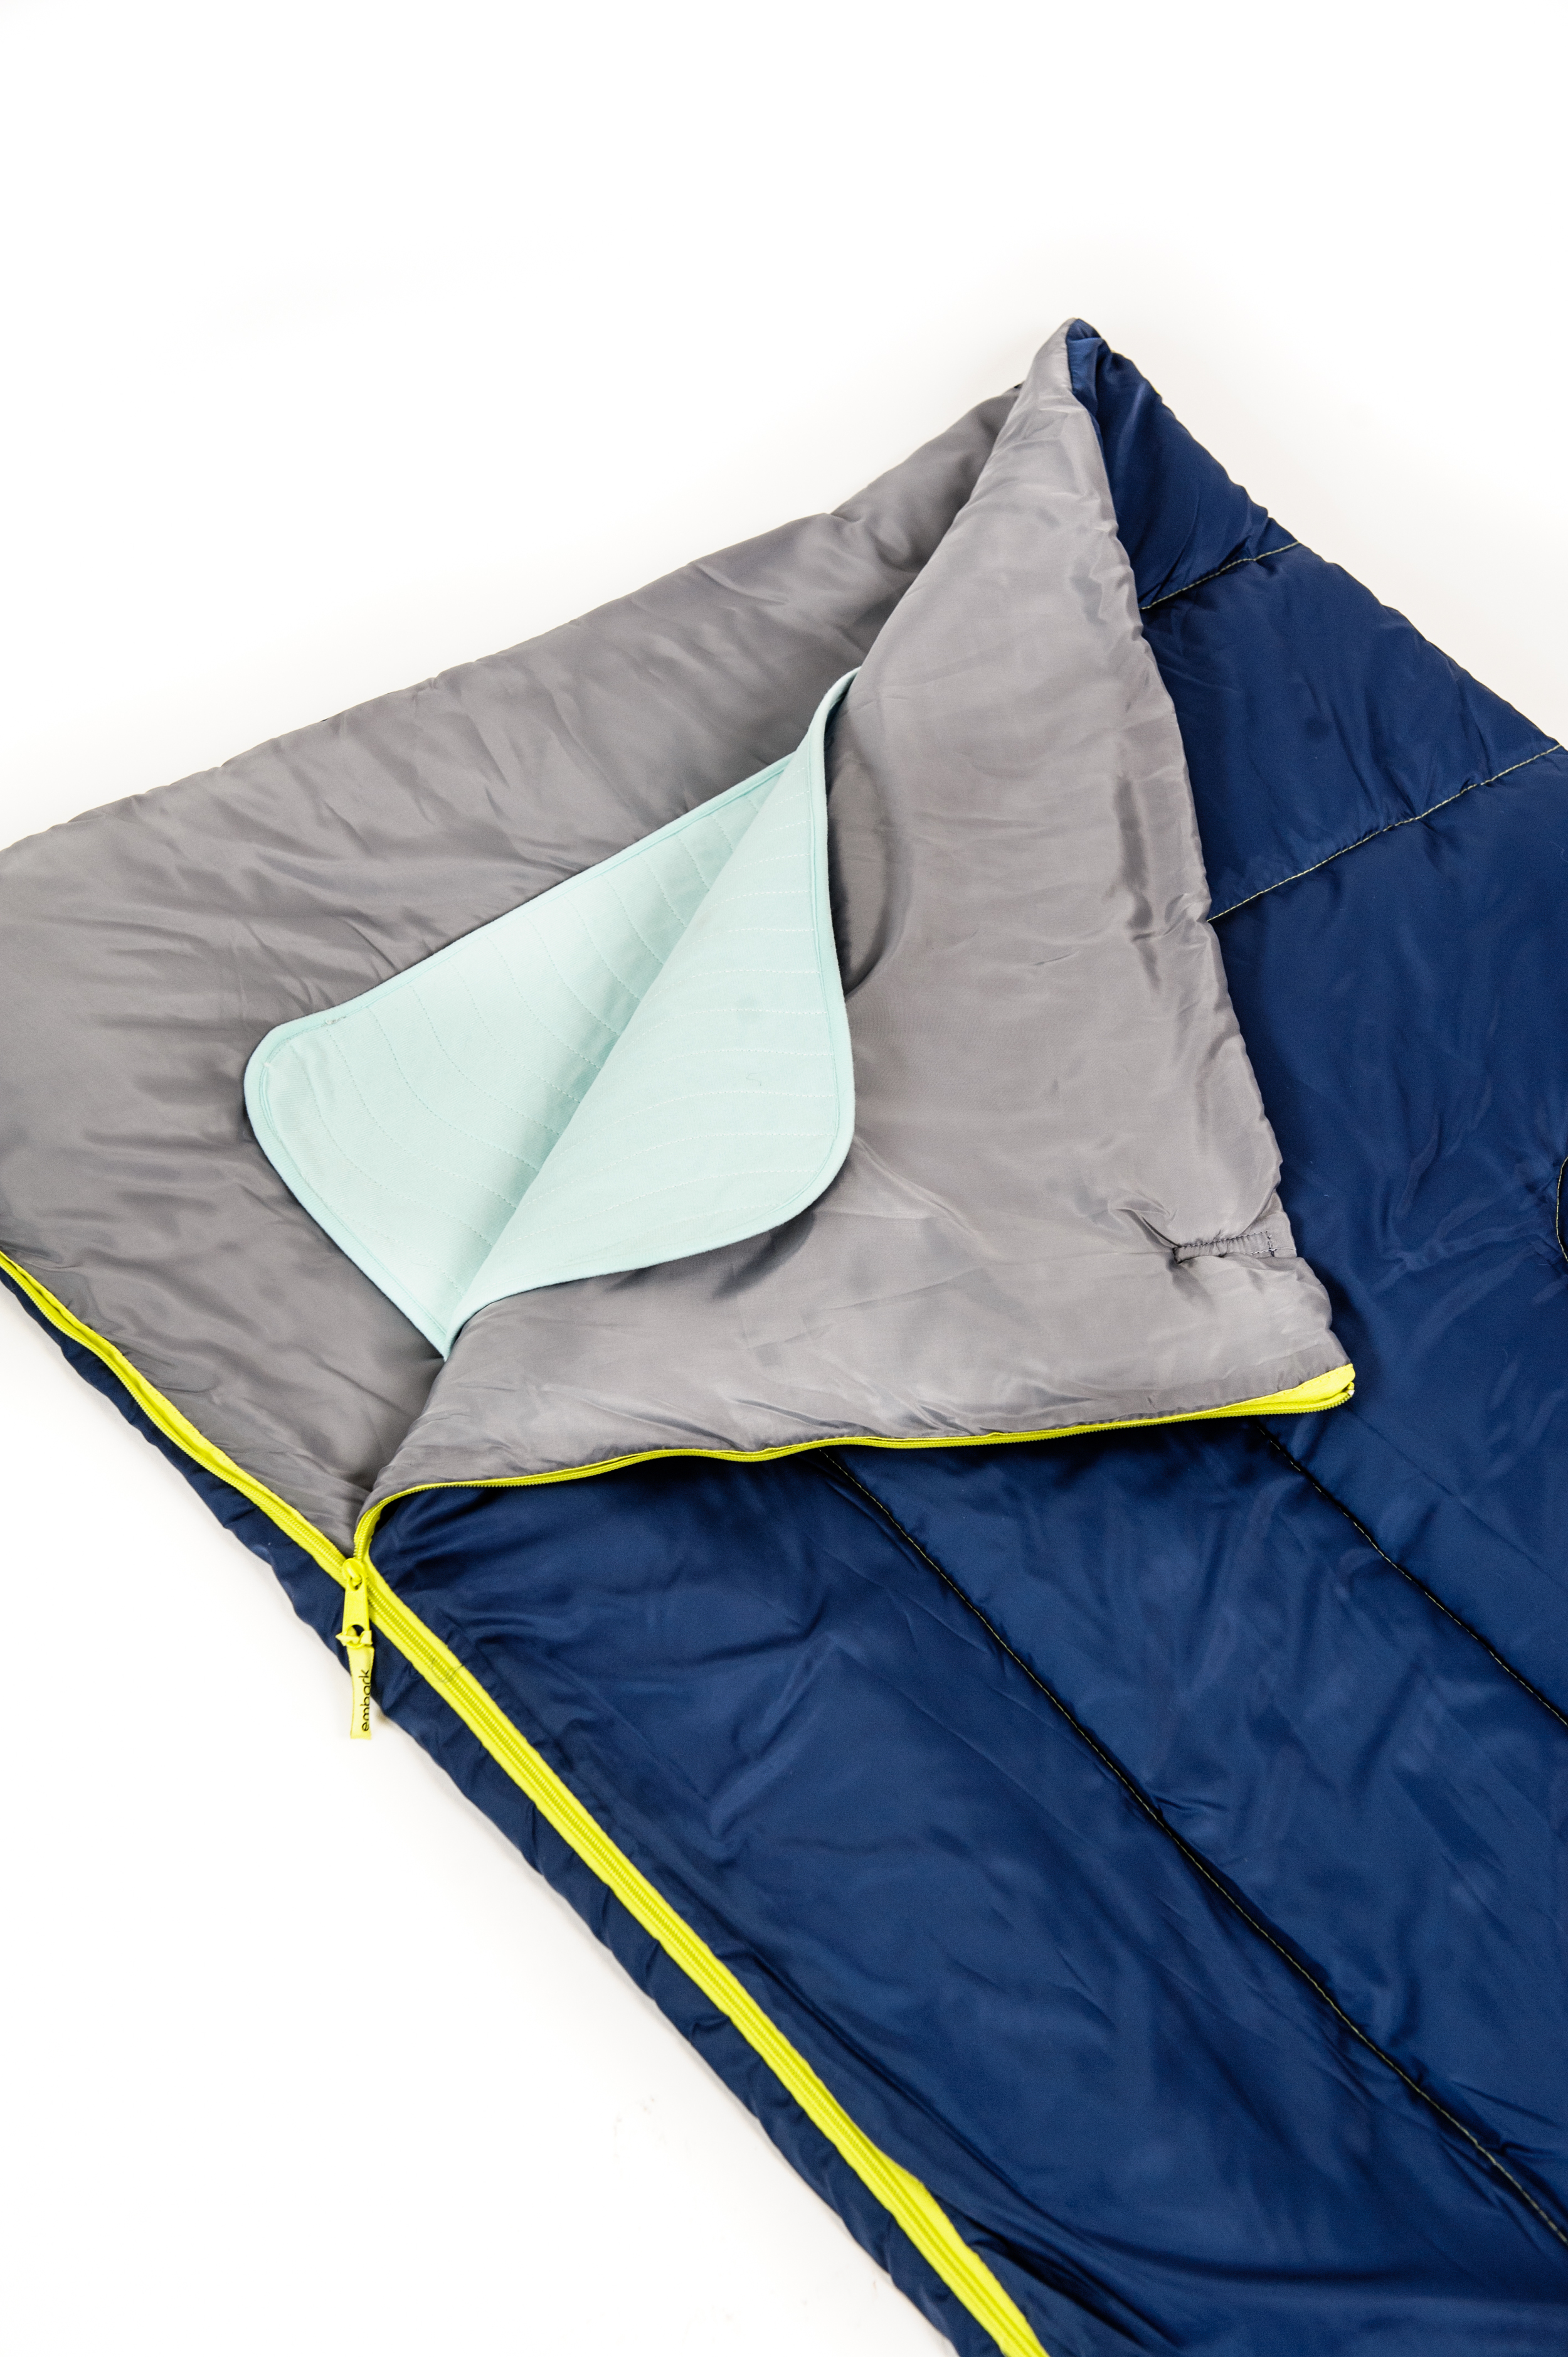 Bedwetting Protection for Camping